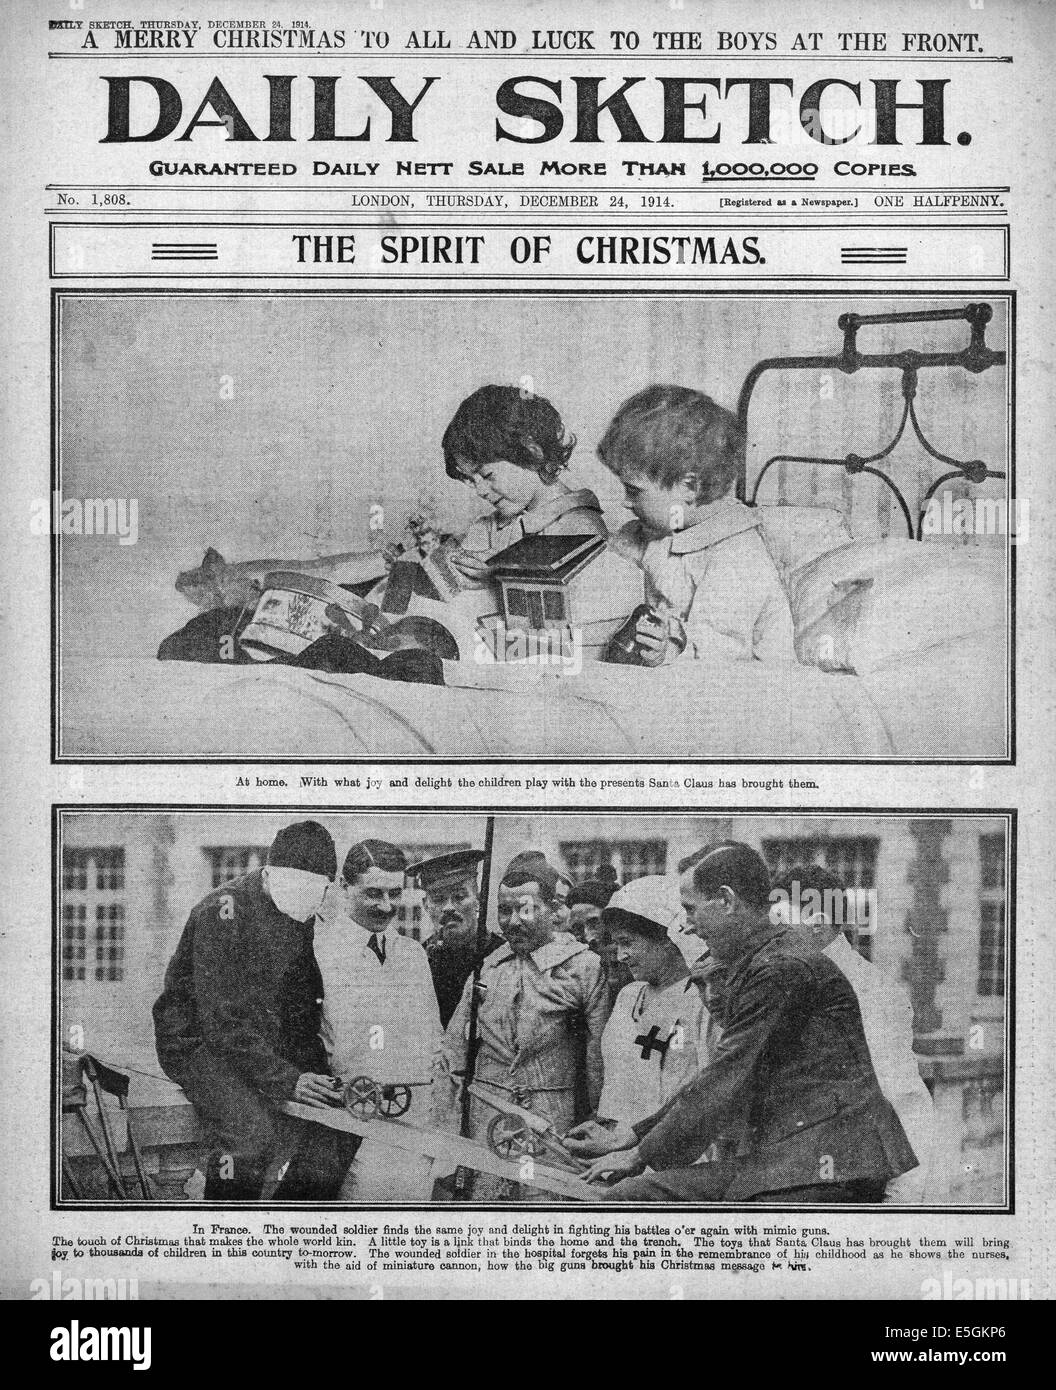 1914 Daily Sketch front page reporting Children with Christmas presents and wounded soldiers with toy guns Stock Photo